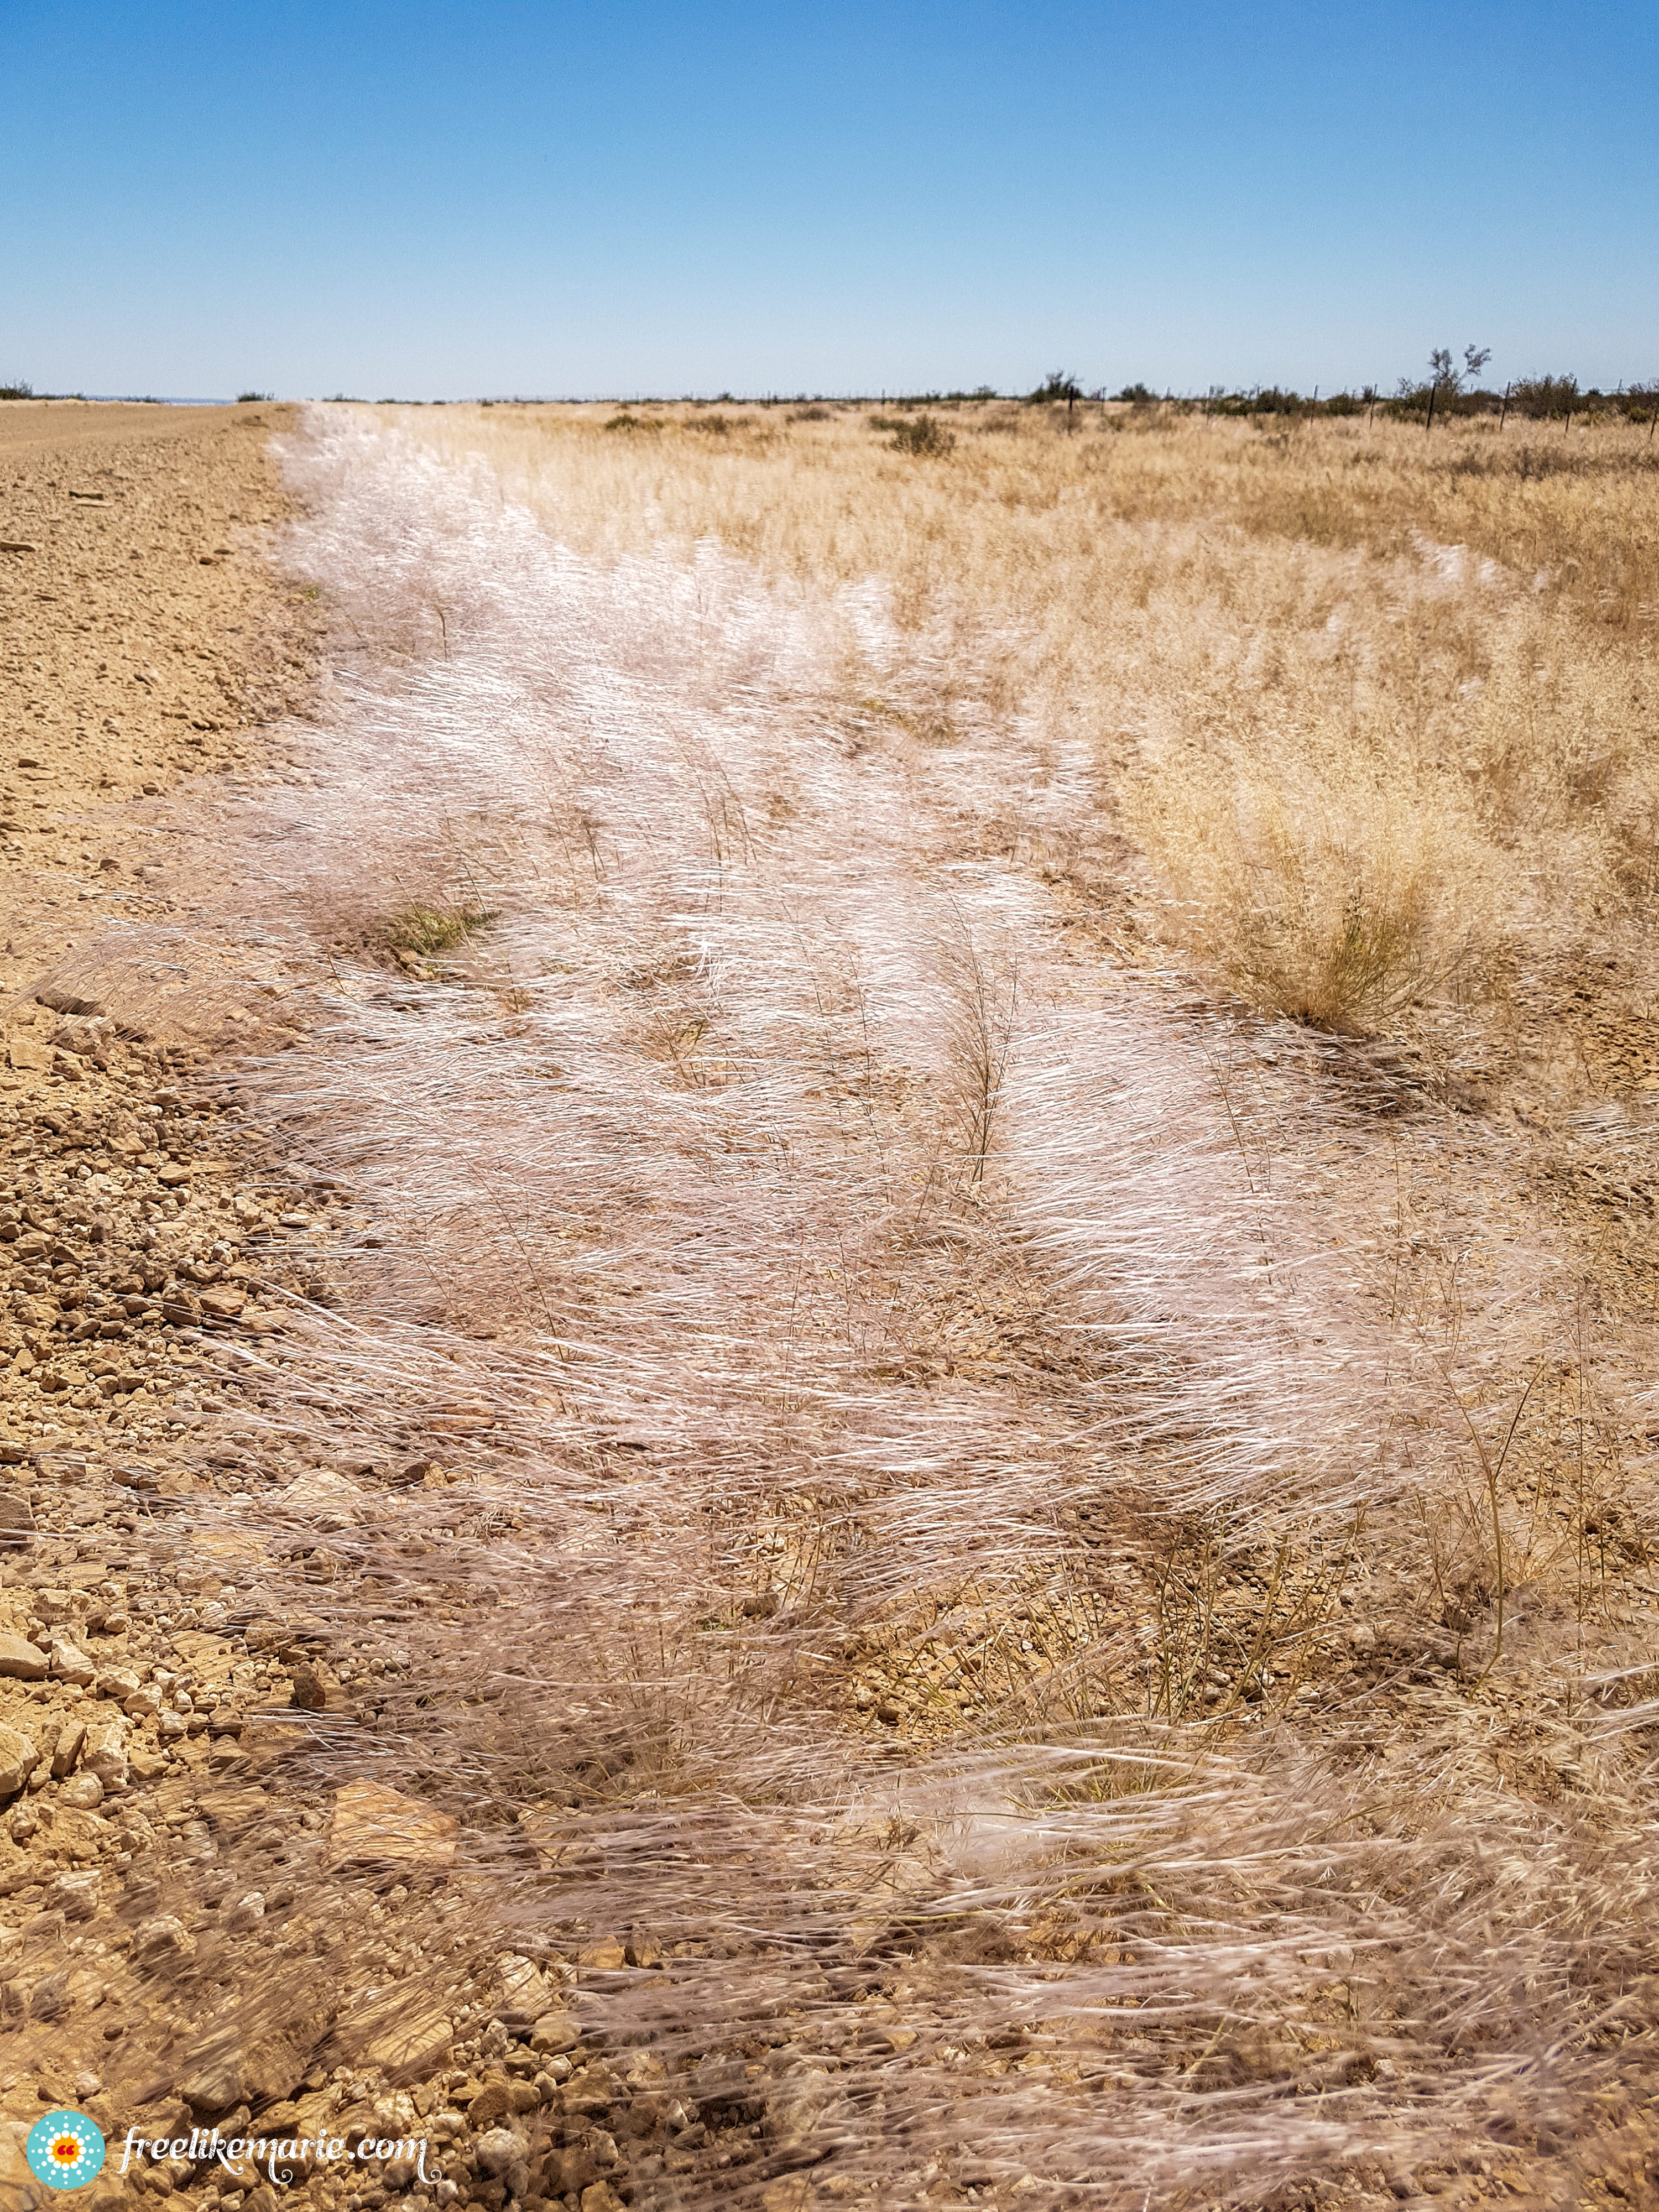 Grass after Rainy Season in Namibia